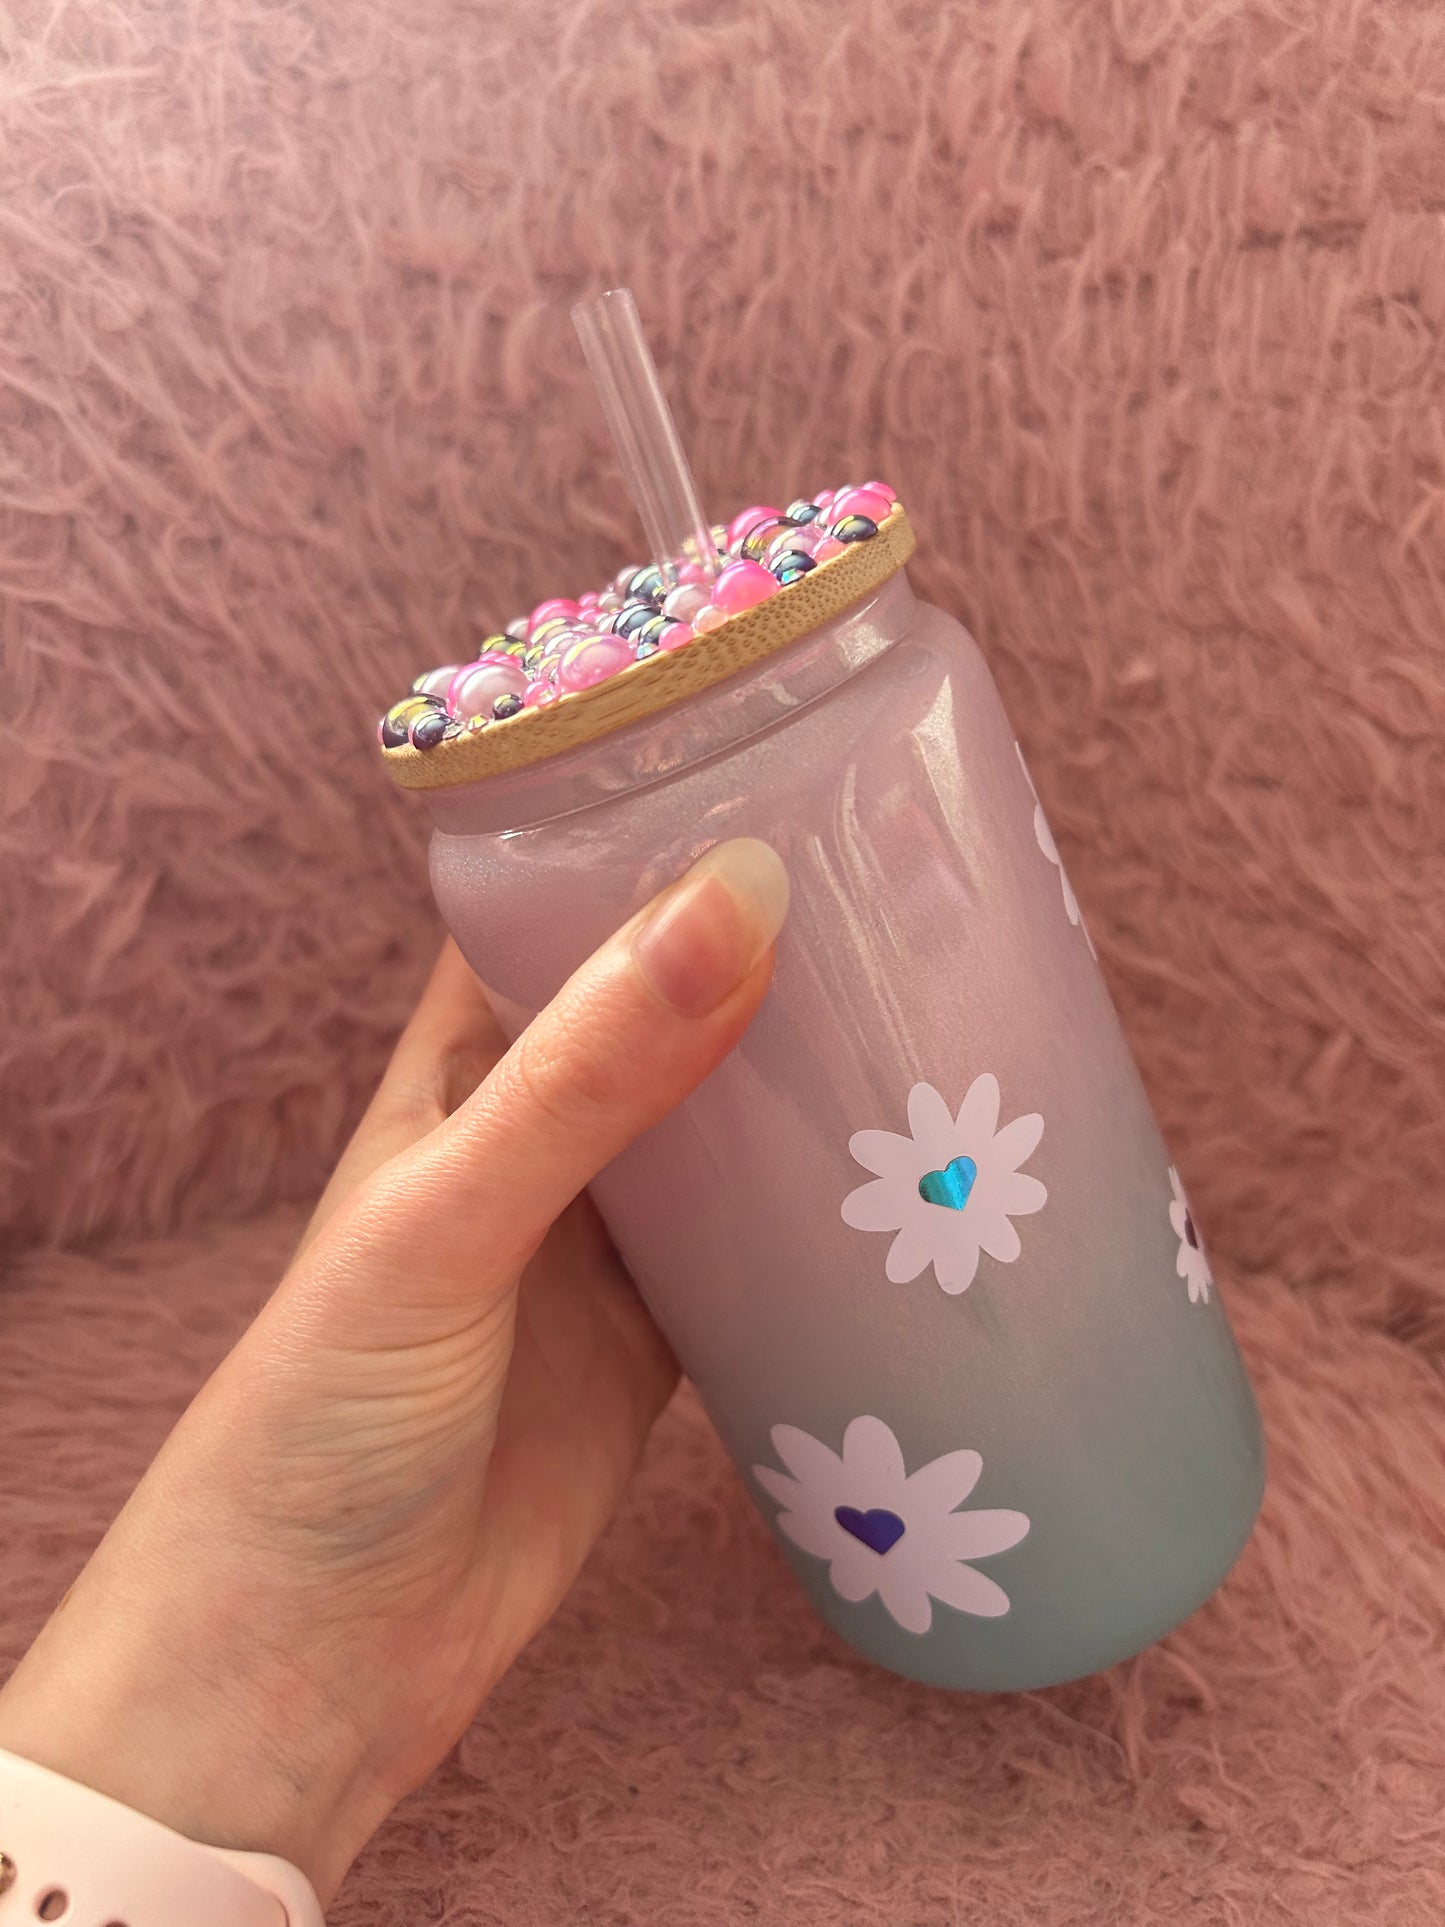 floral ombre glass can